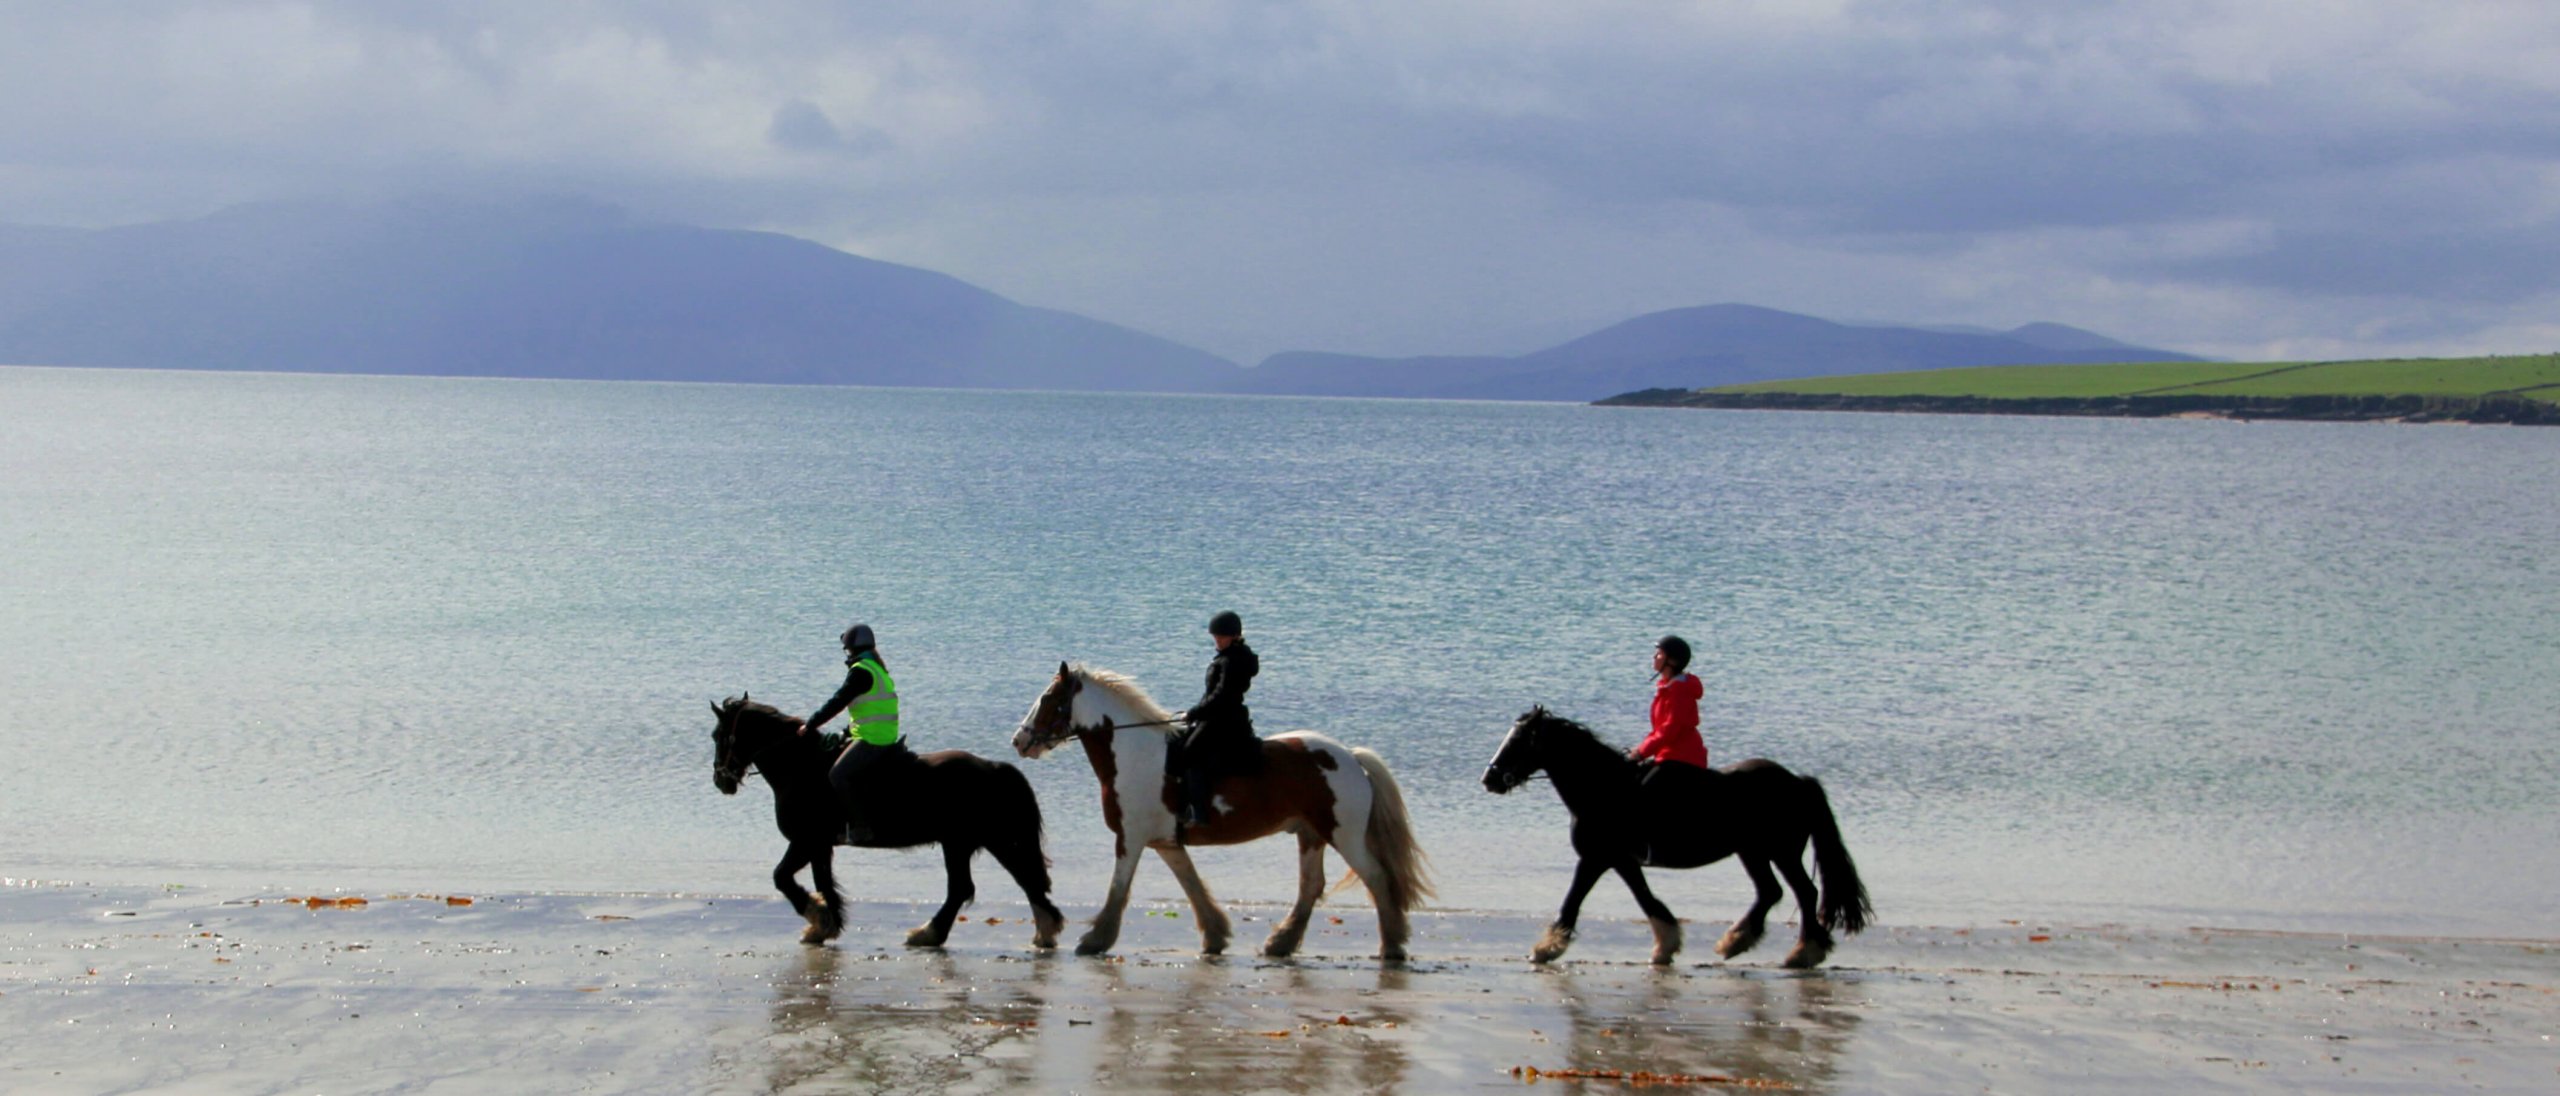 Adventure tour guests riding horses on a scenic beach in Ireland